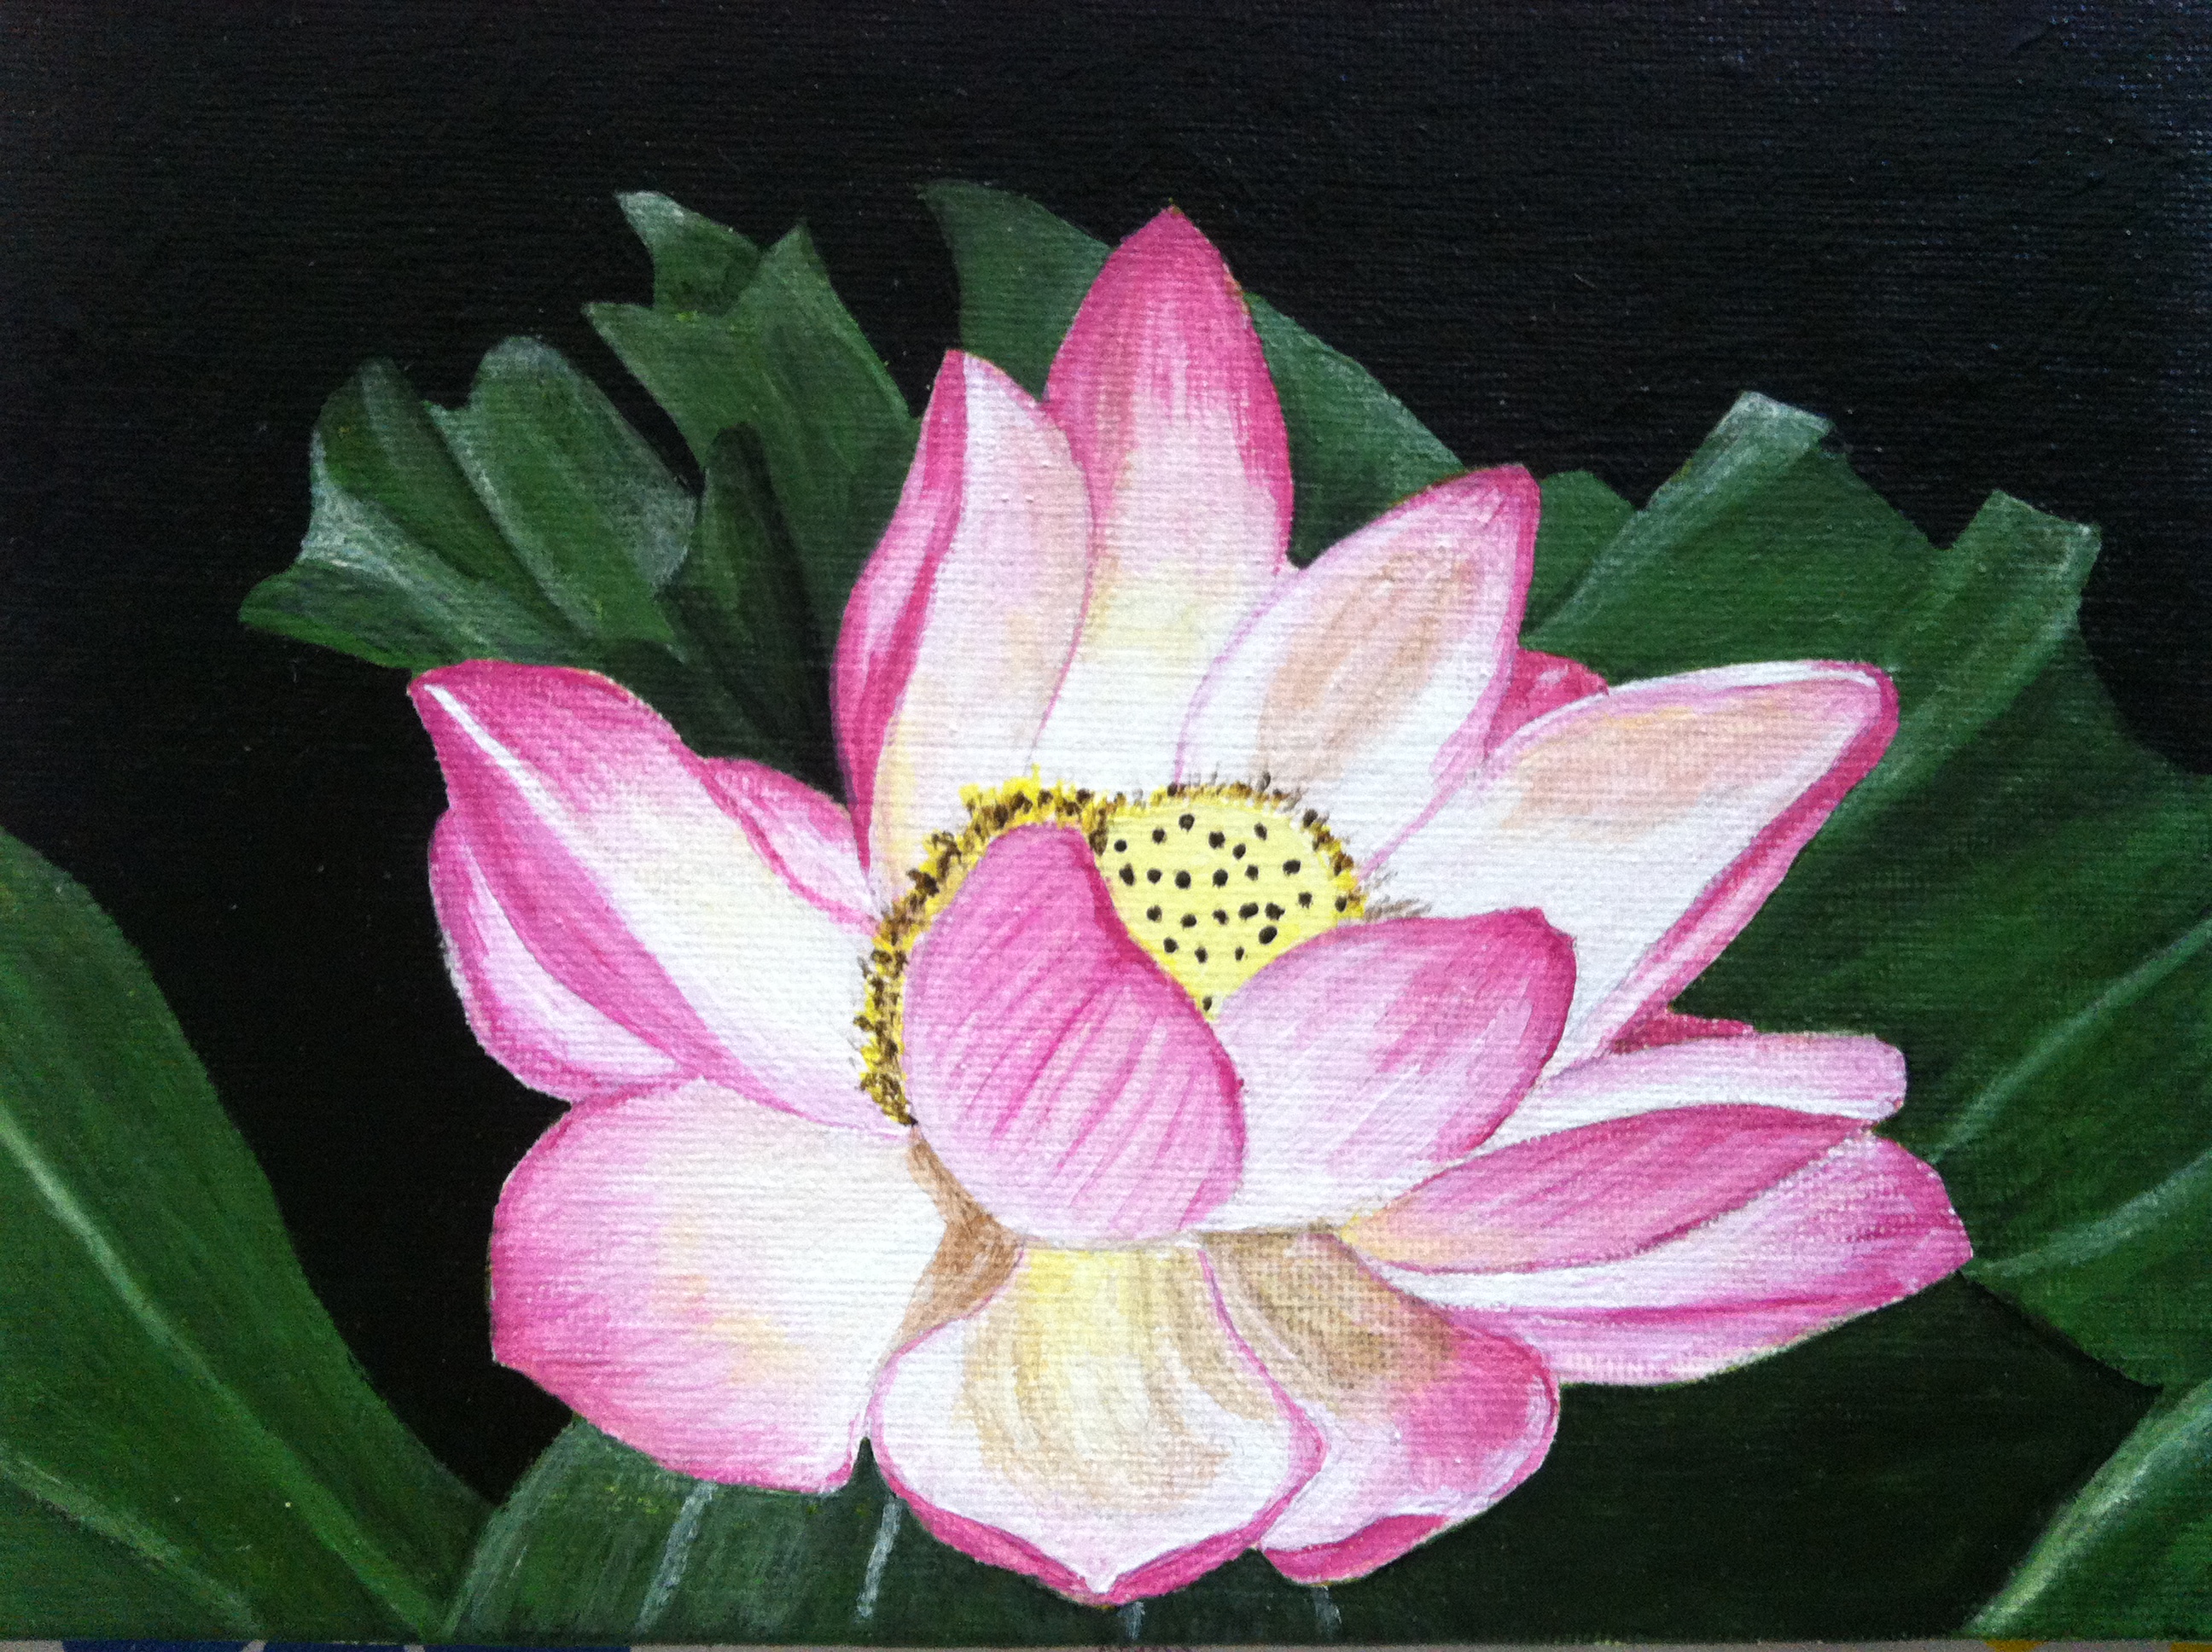 Water Lily - Greeting Card